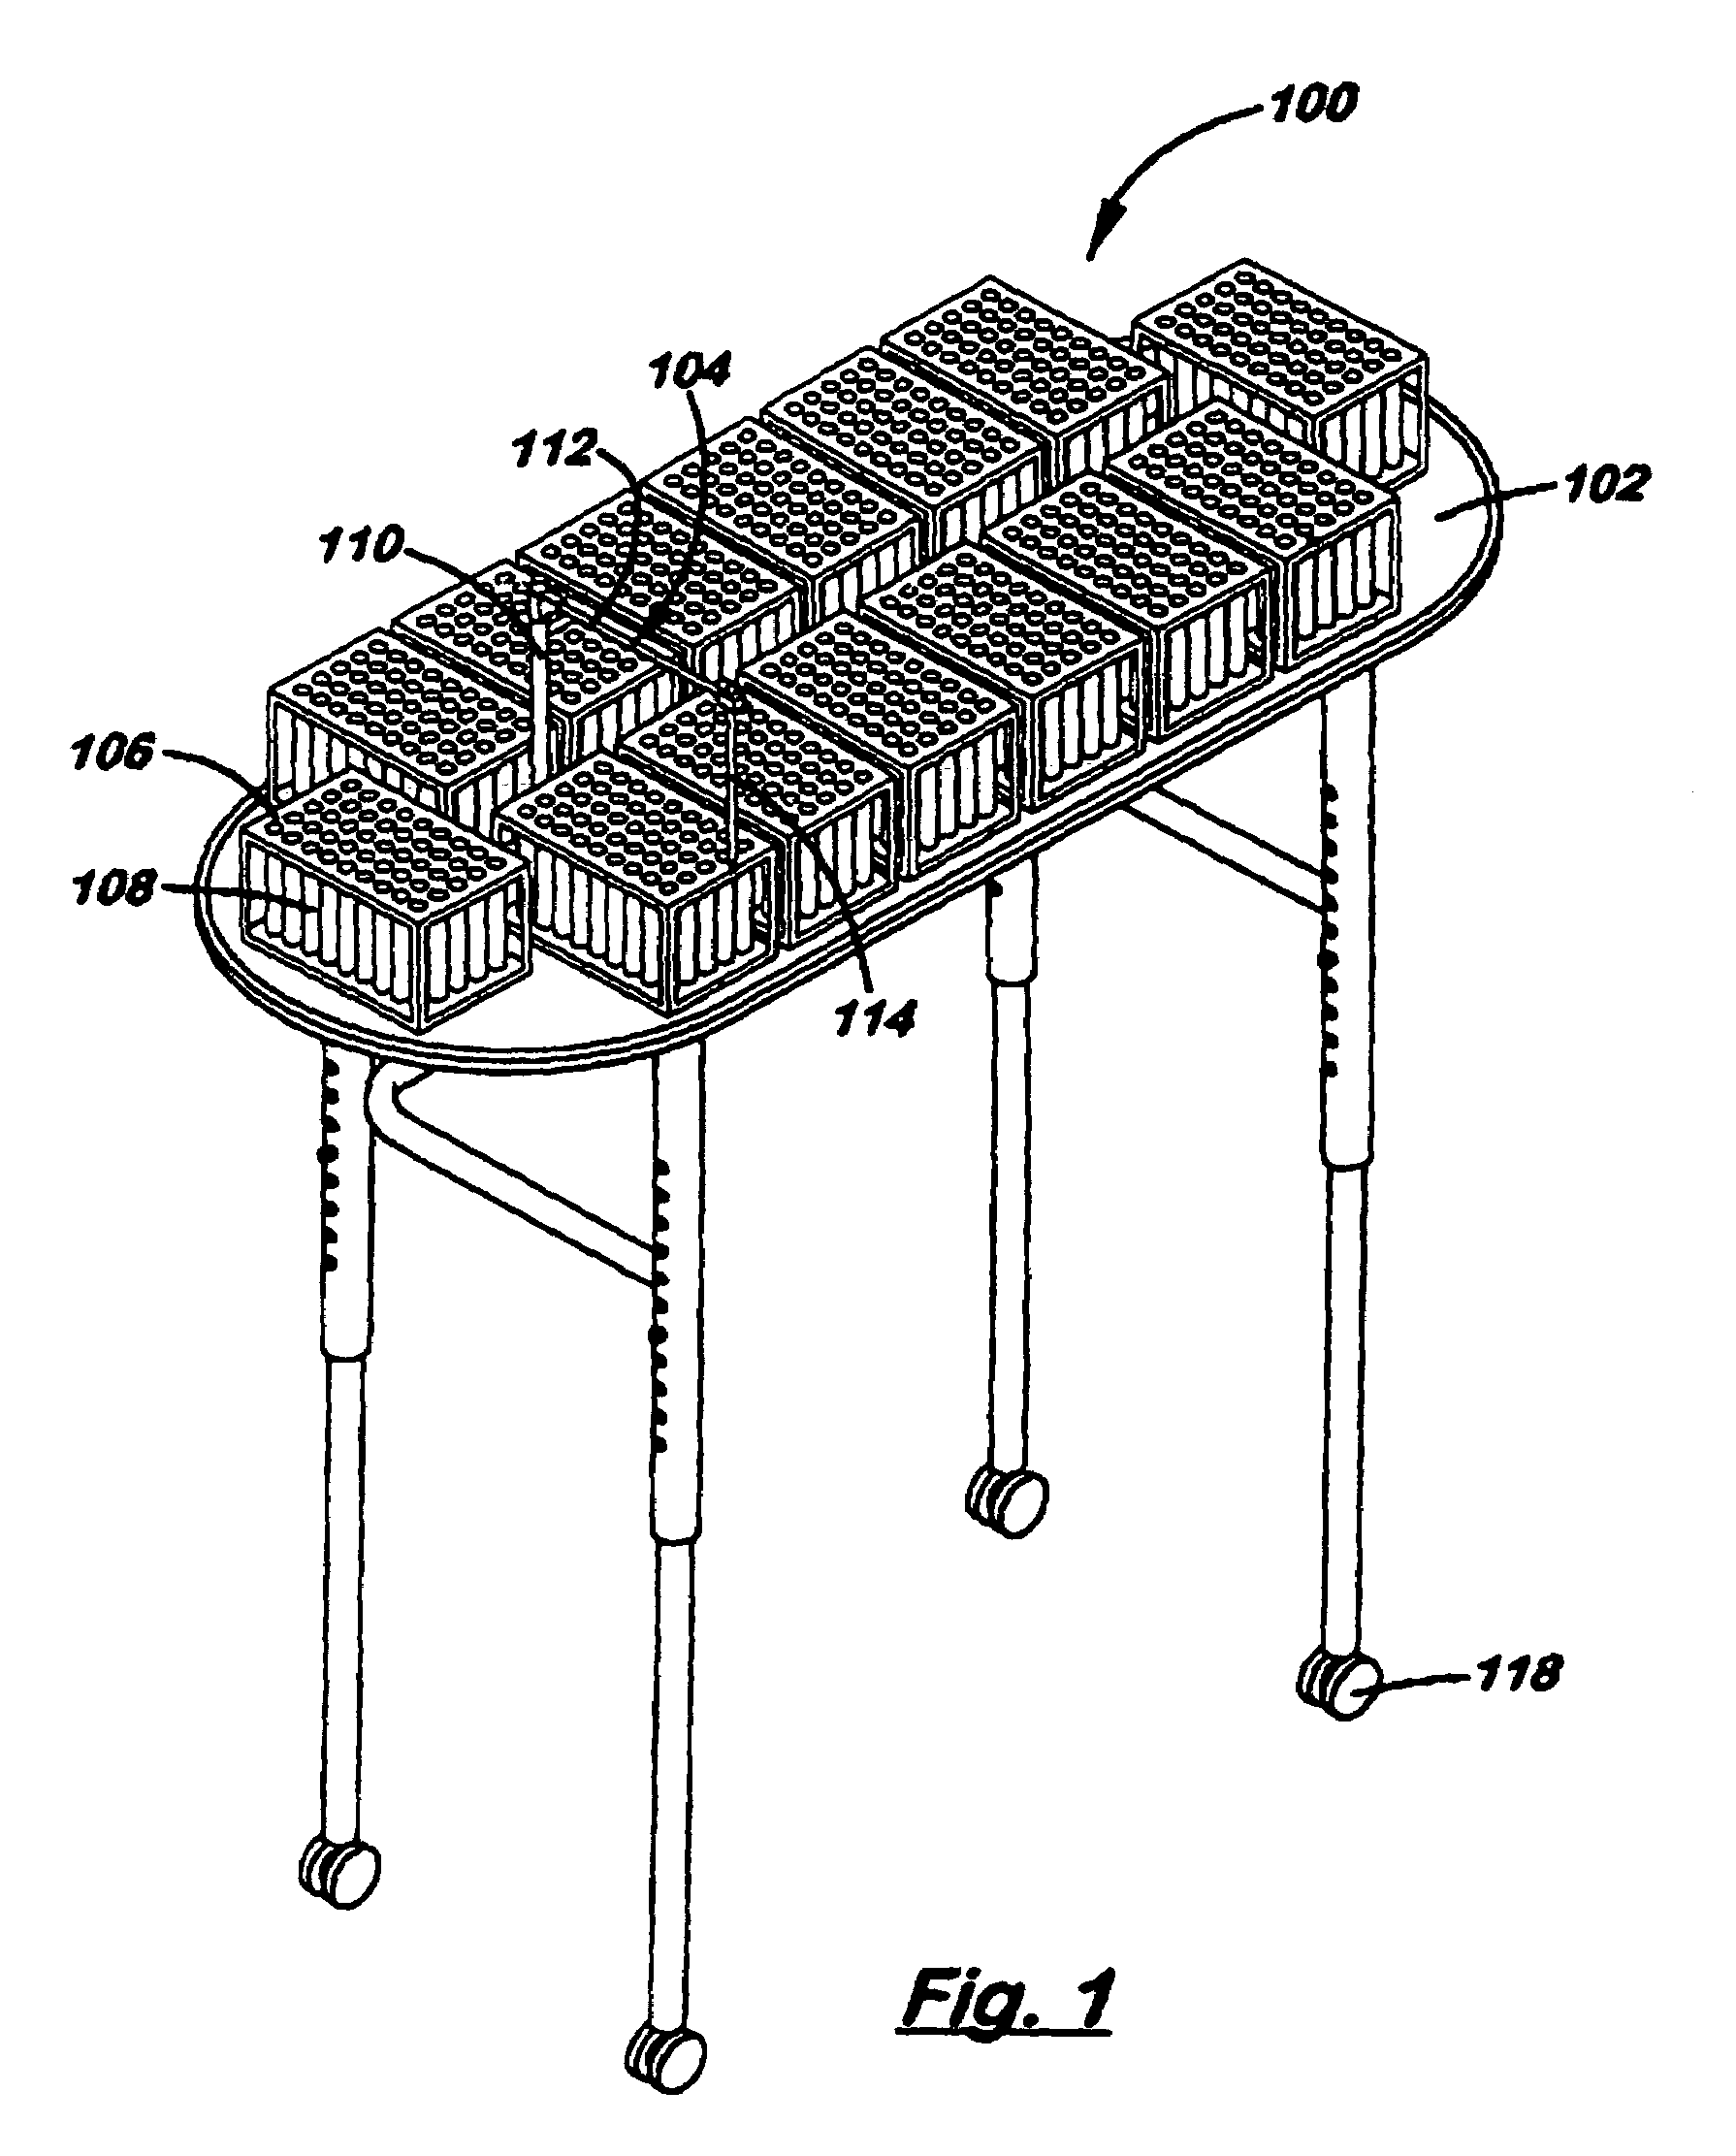 Automated sampling device